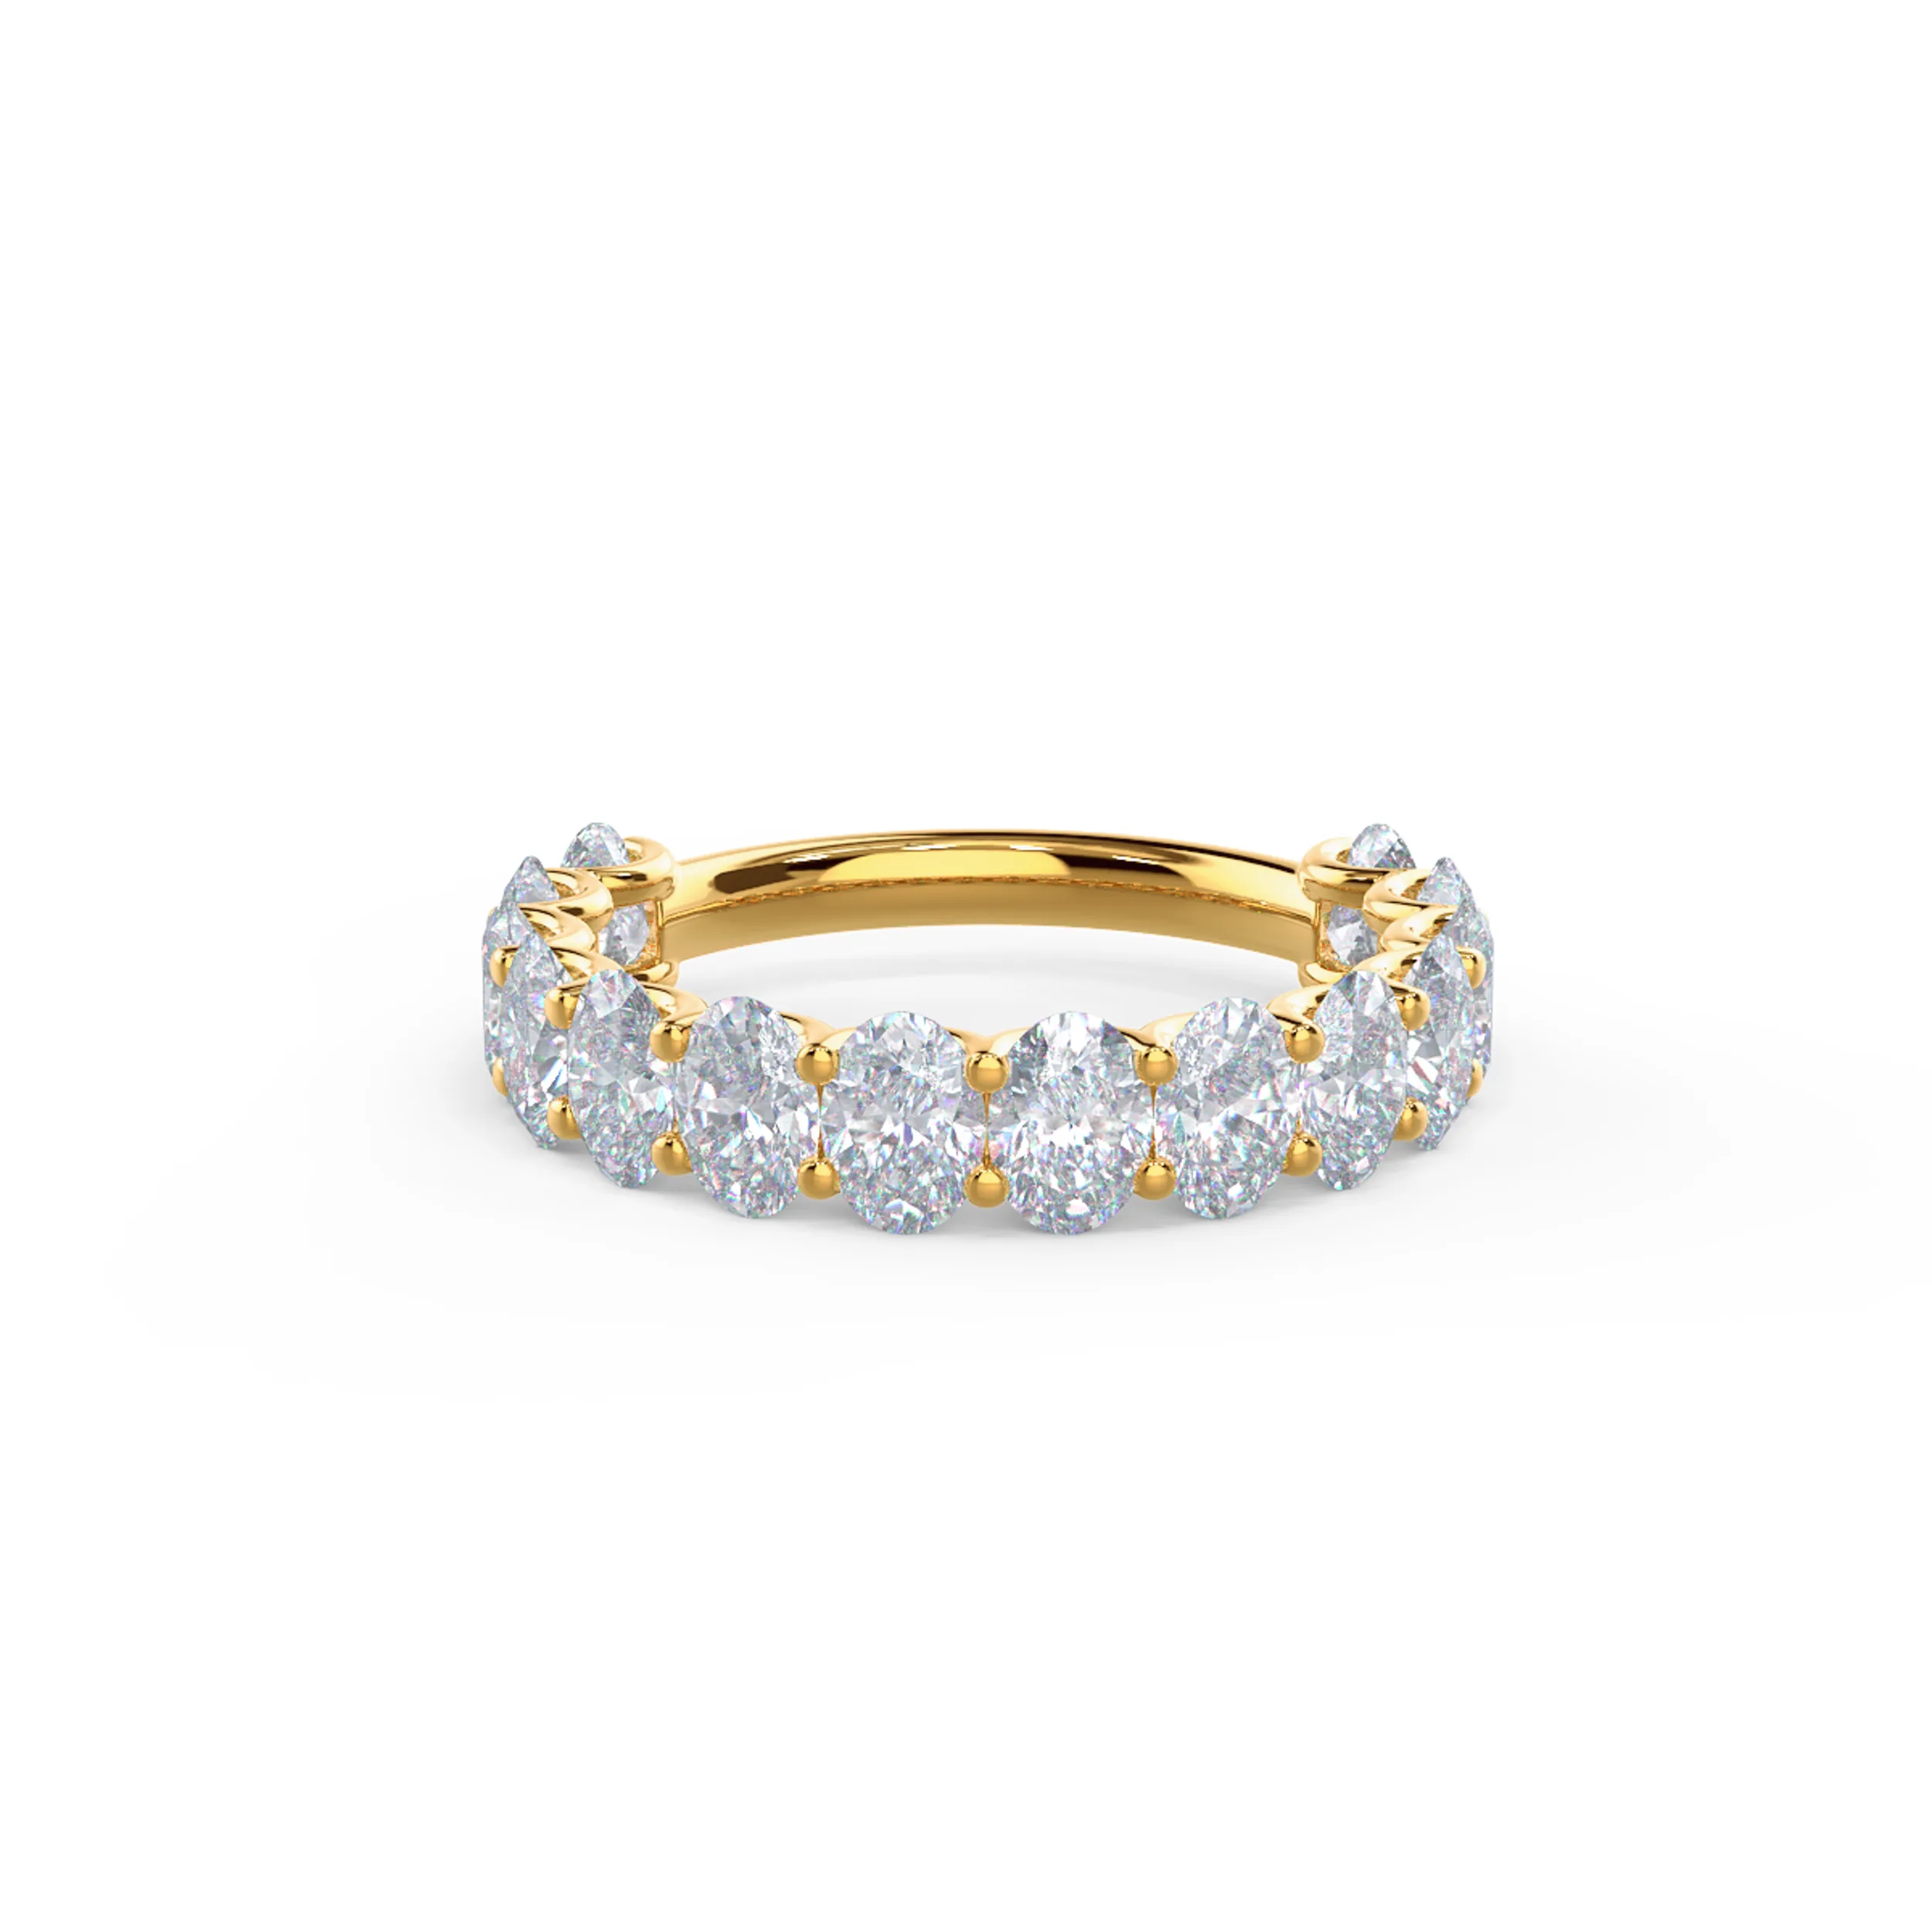 Hand Selected 2.85 ct Lab Diamonds set in Yellow Gold Oval French U Three Quarter Band (Main View)